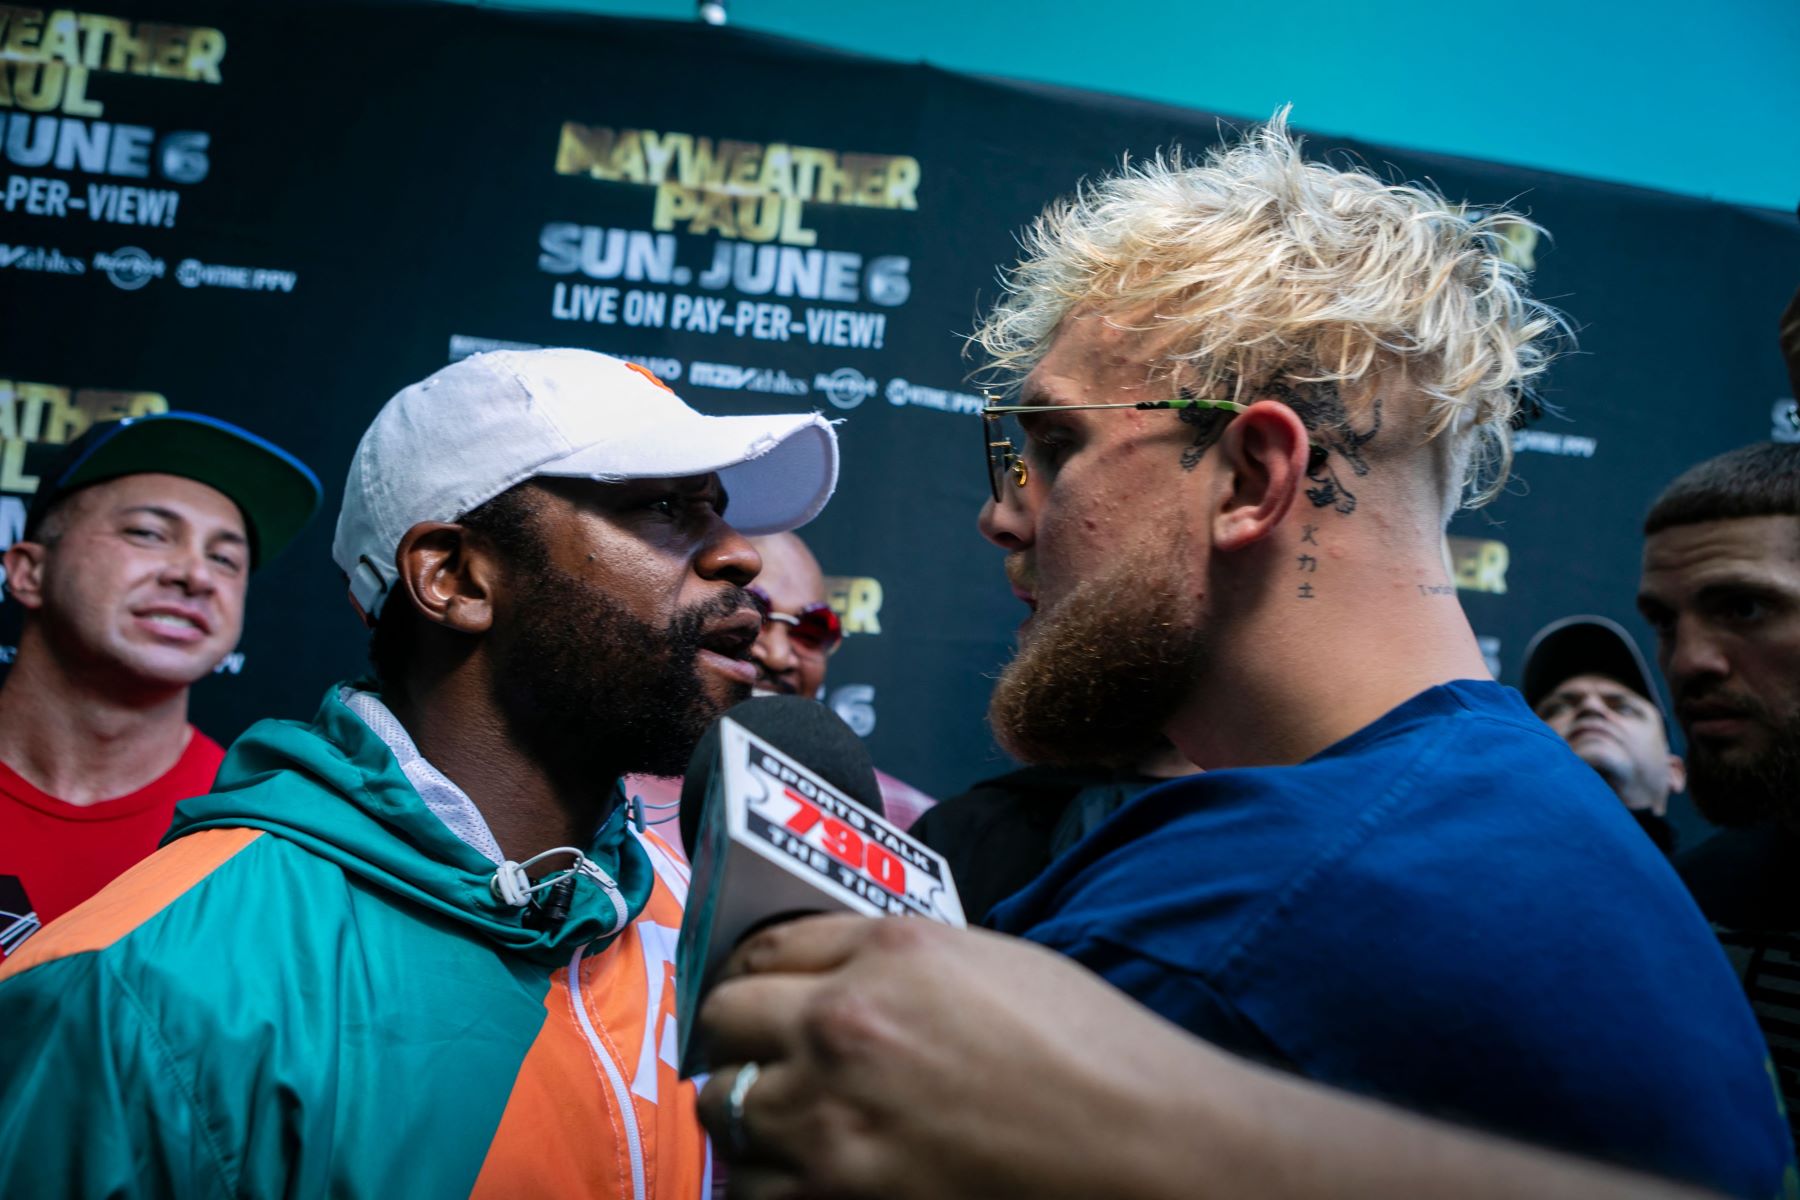 Floyd Mayweather Jr. and Jake Paul staring each other down before the Logan Paul vs Mayweather fight in Miami, Florida